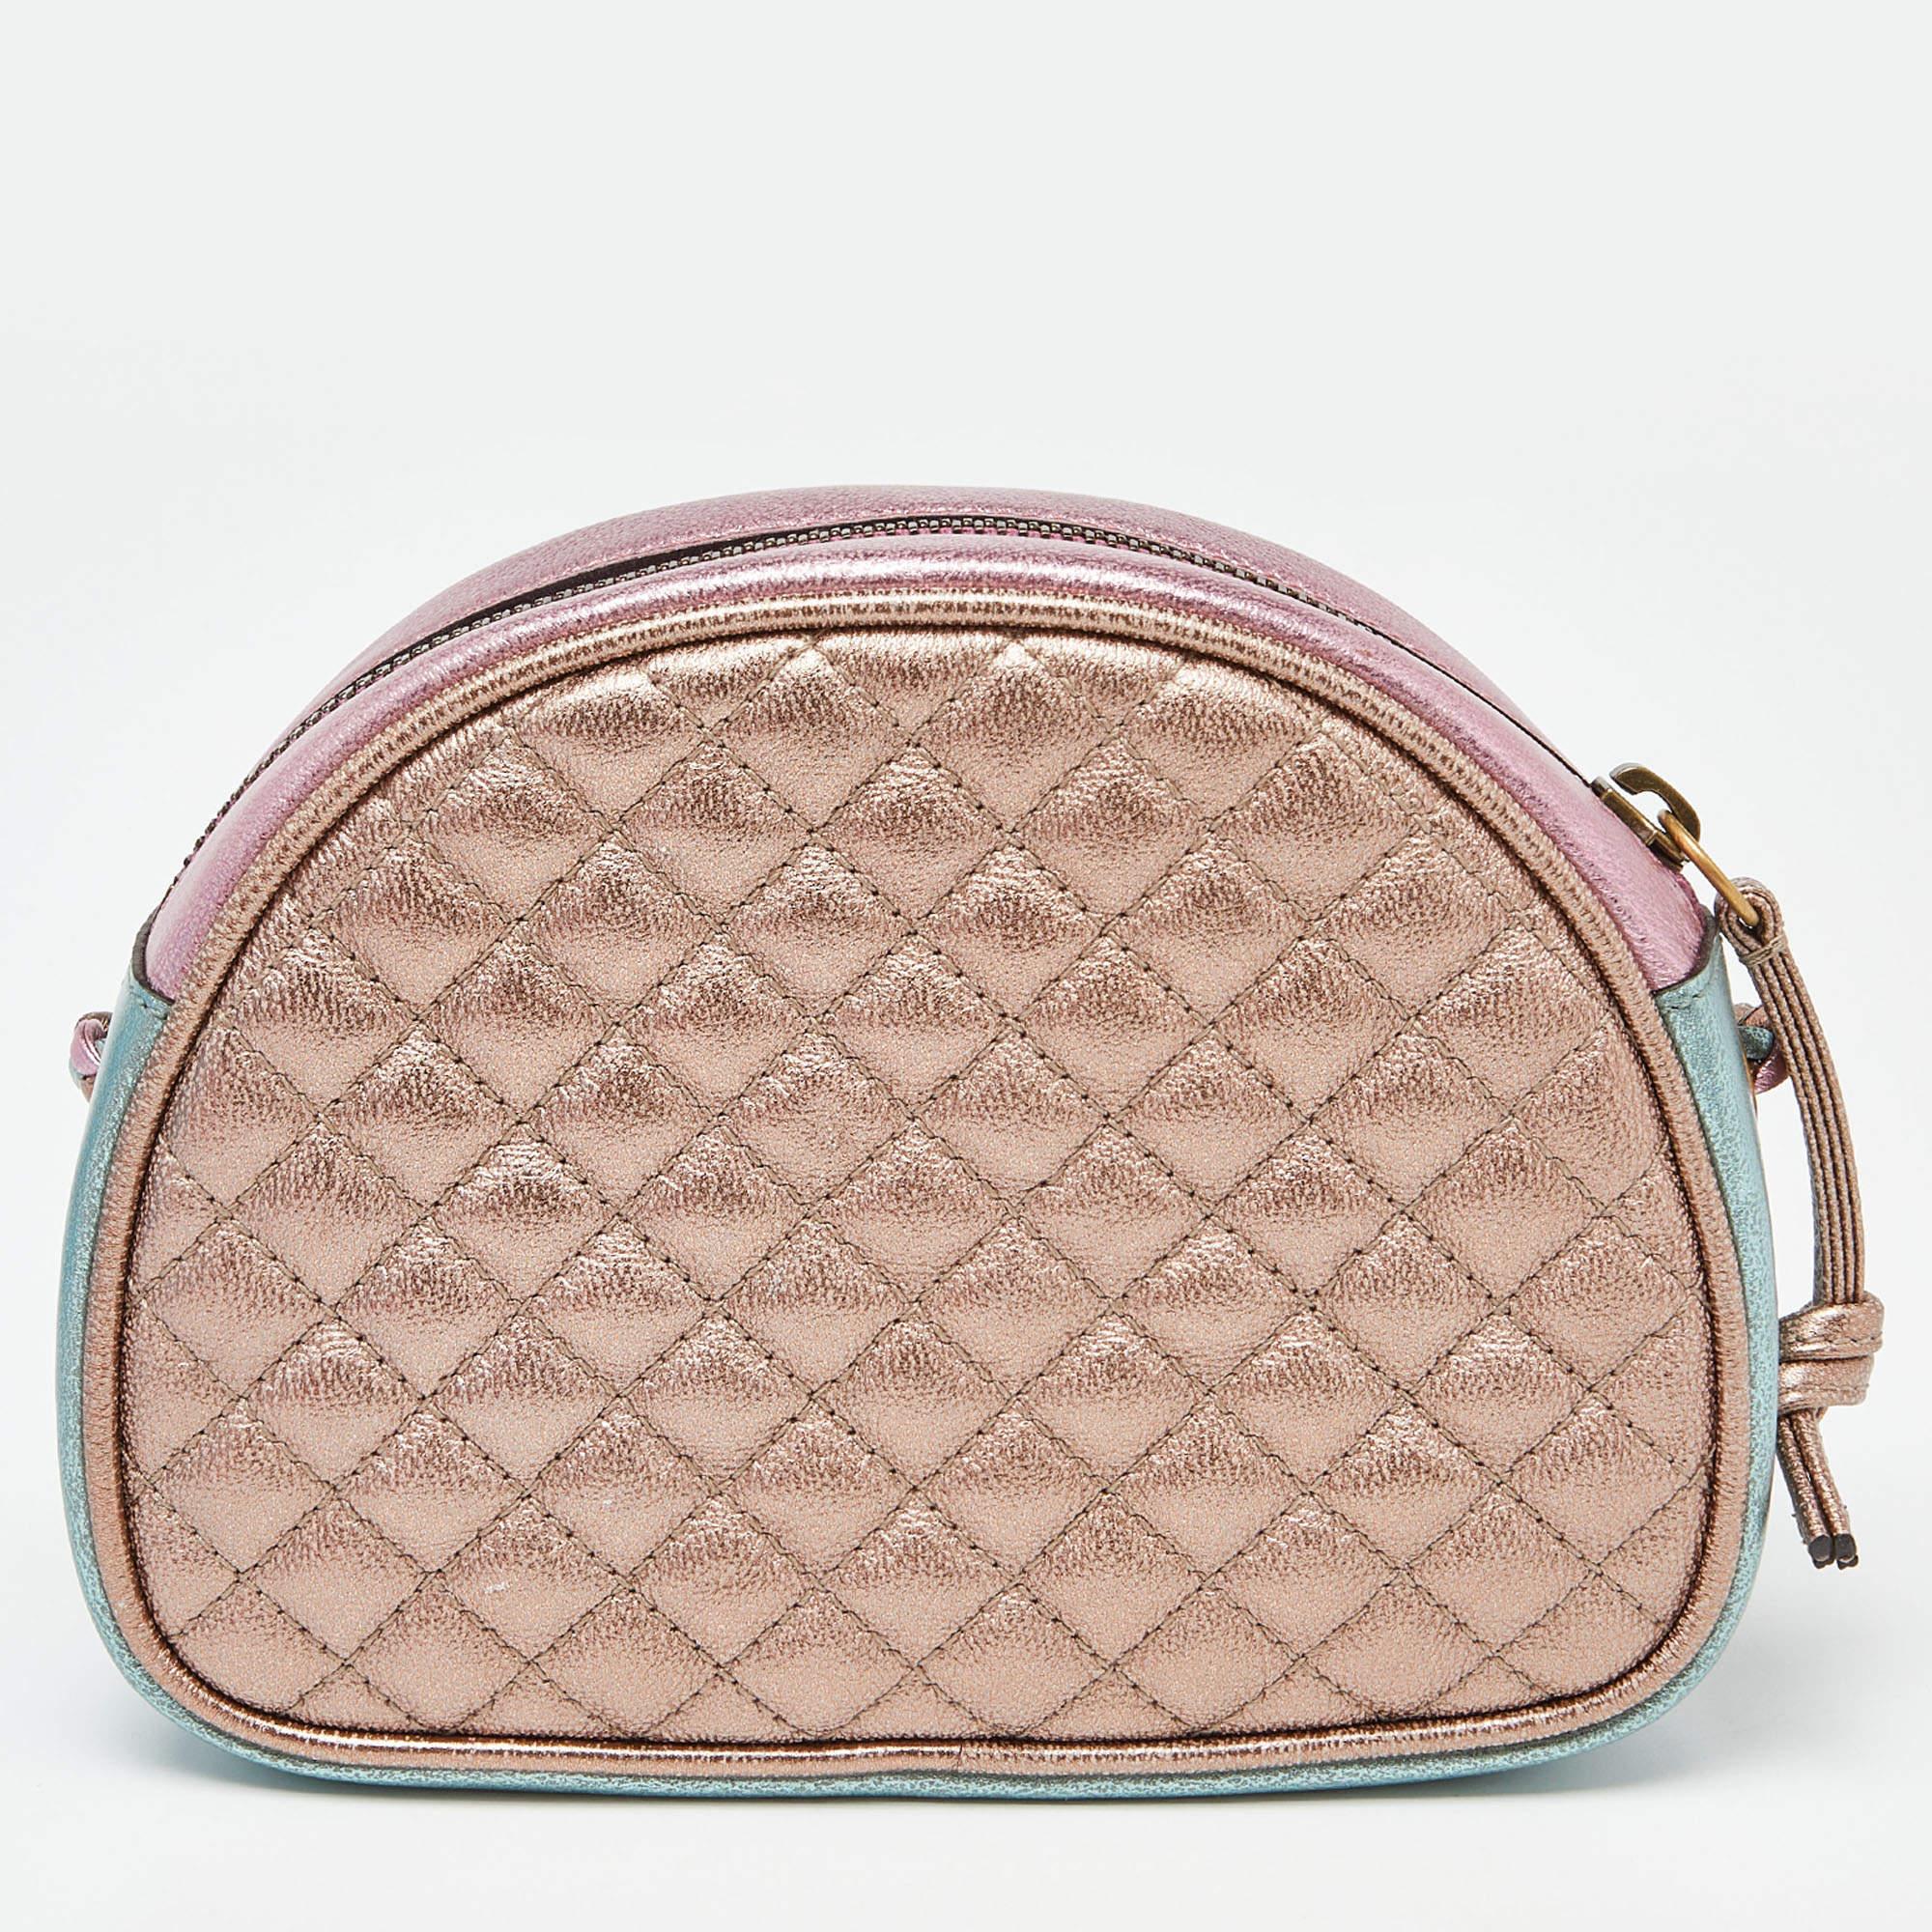 This mini Trapuntata crossbody bag by Gucci is a fine option to add to your wardrobe. This quilted leather bag has a compact size with a signature motif on the front and a zipper closure at the top to secure the fabric interior. Designed to be